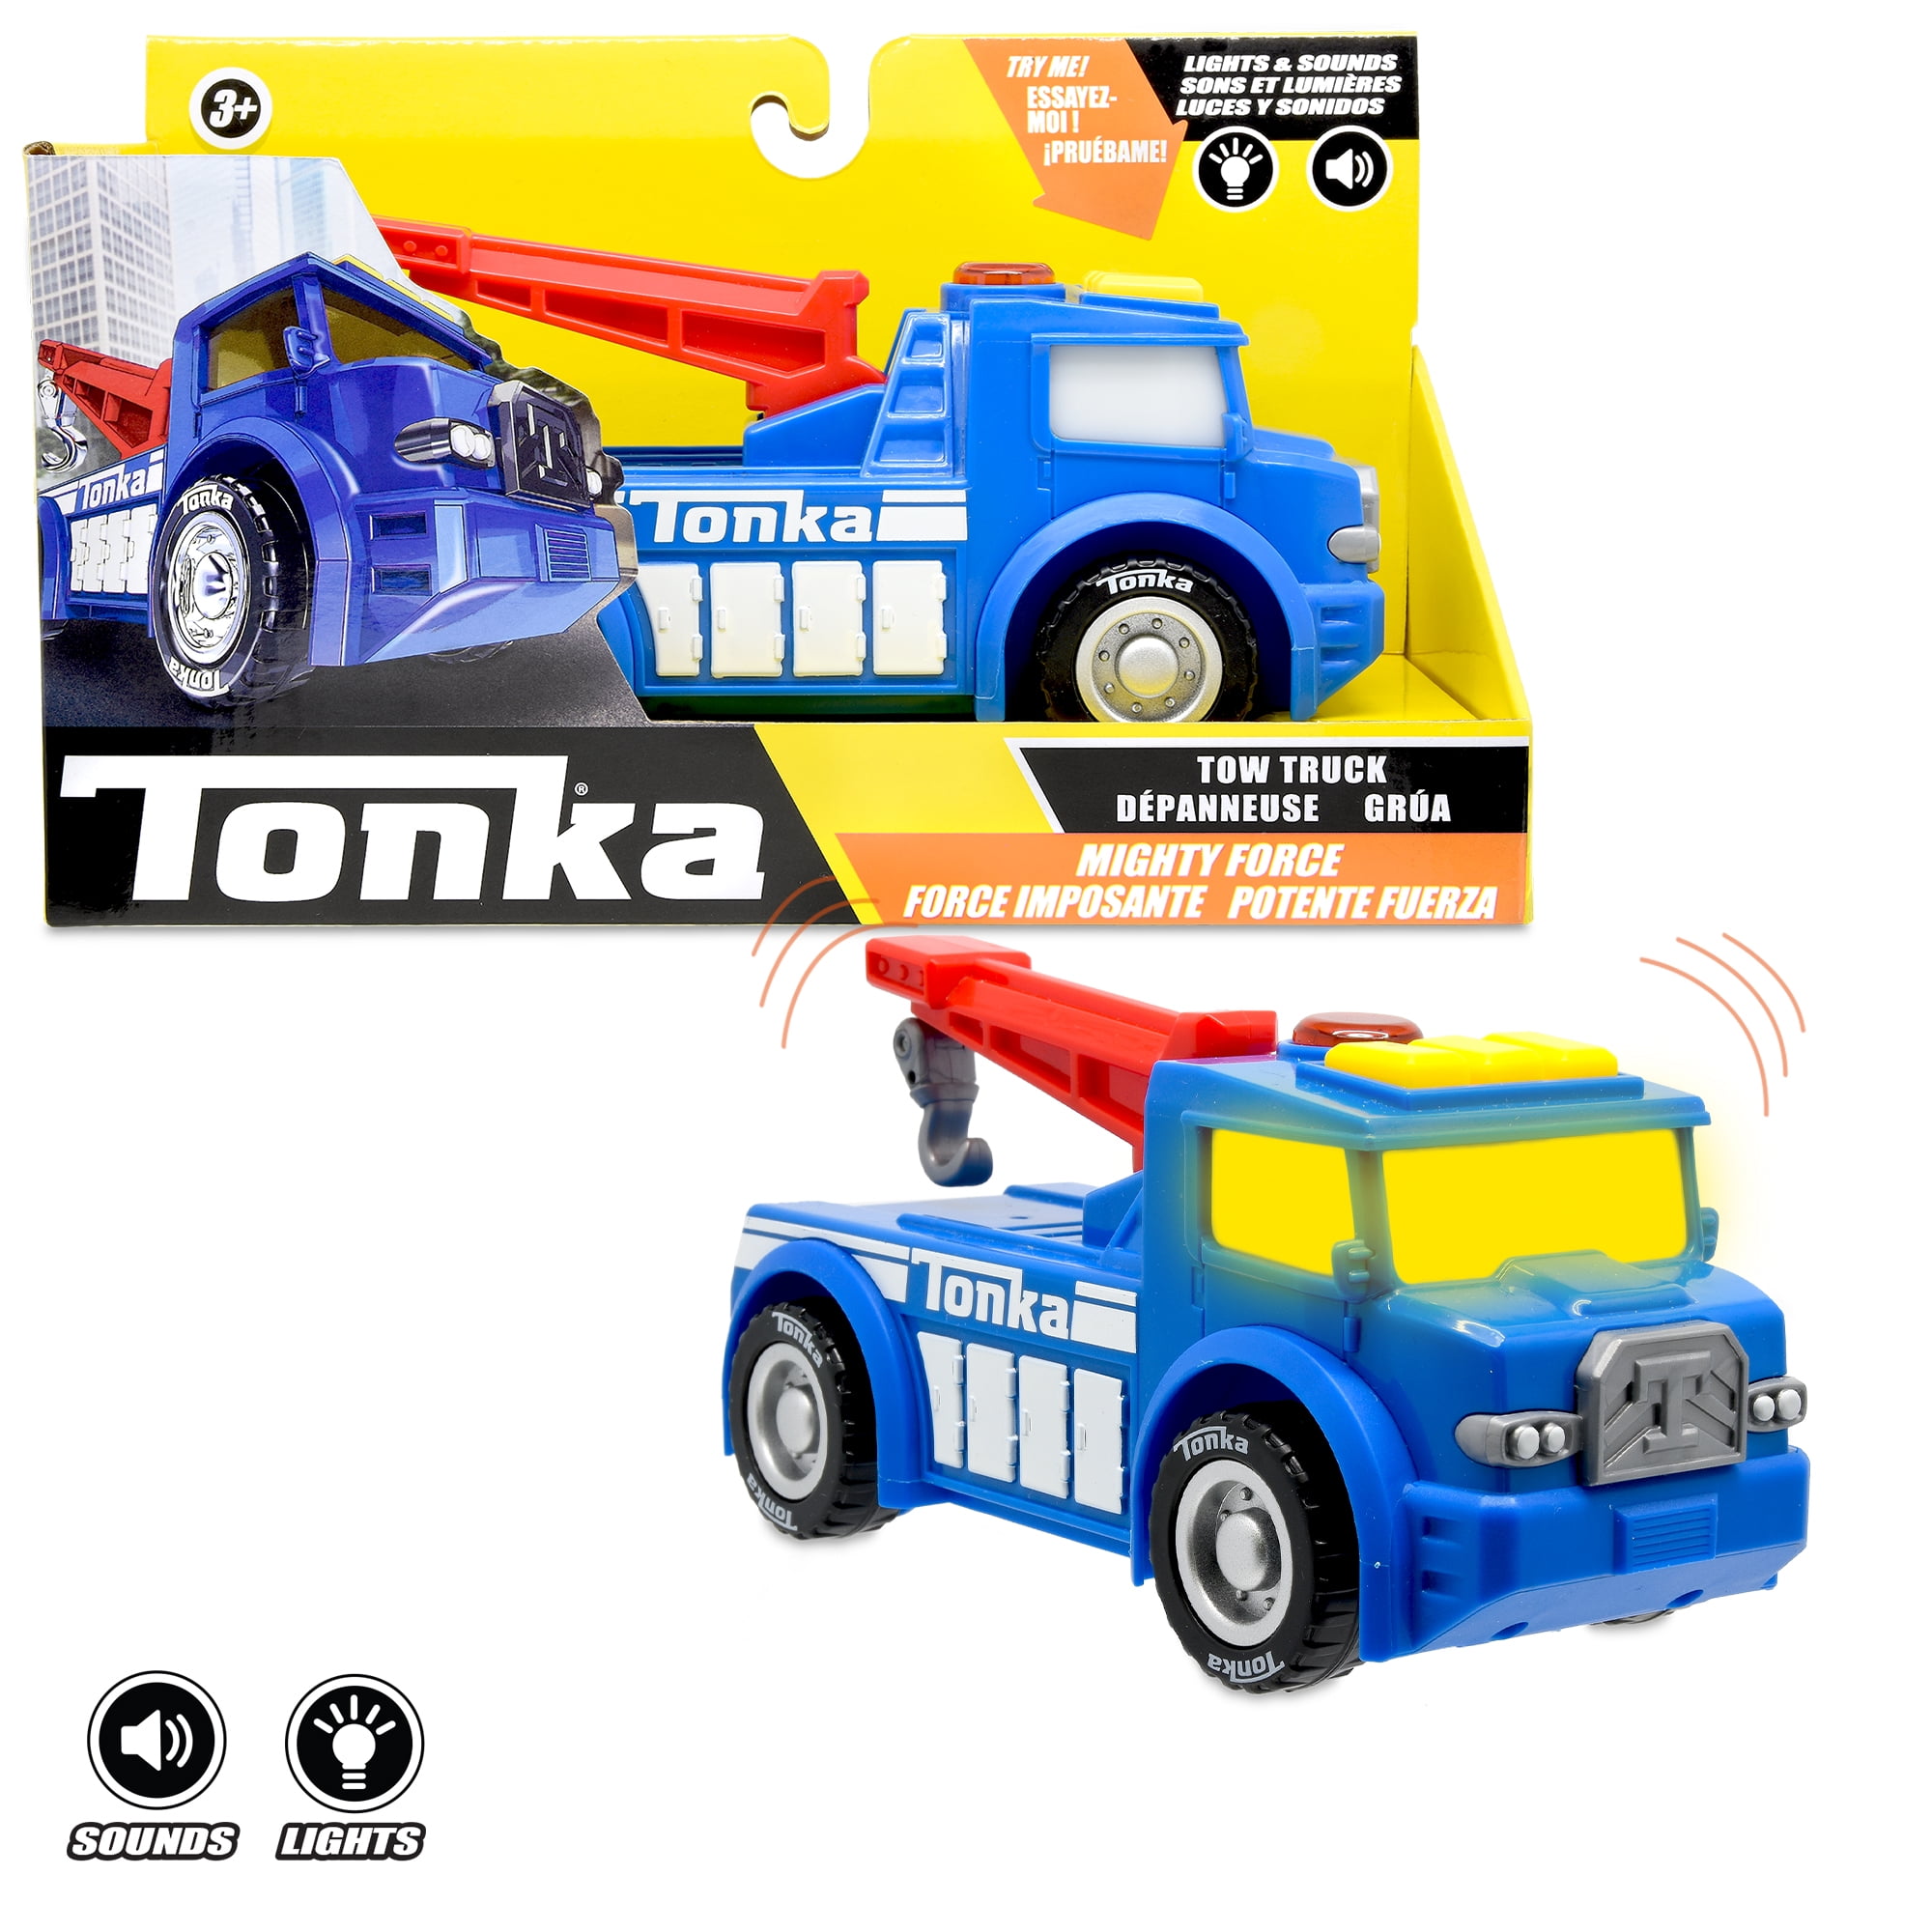 Tonka fire pumper or tow truck replacement dumbell light 